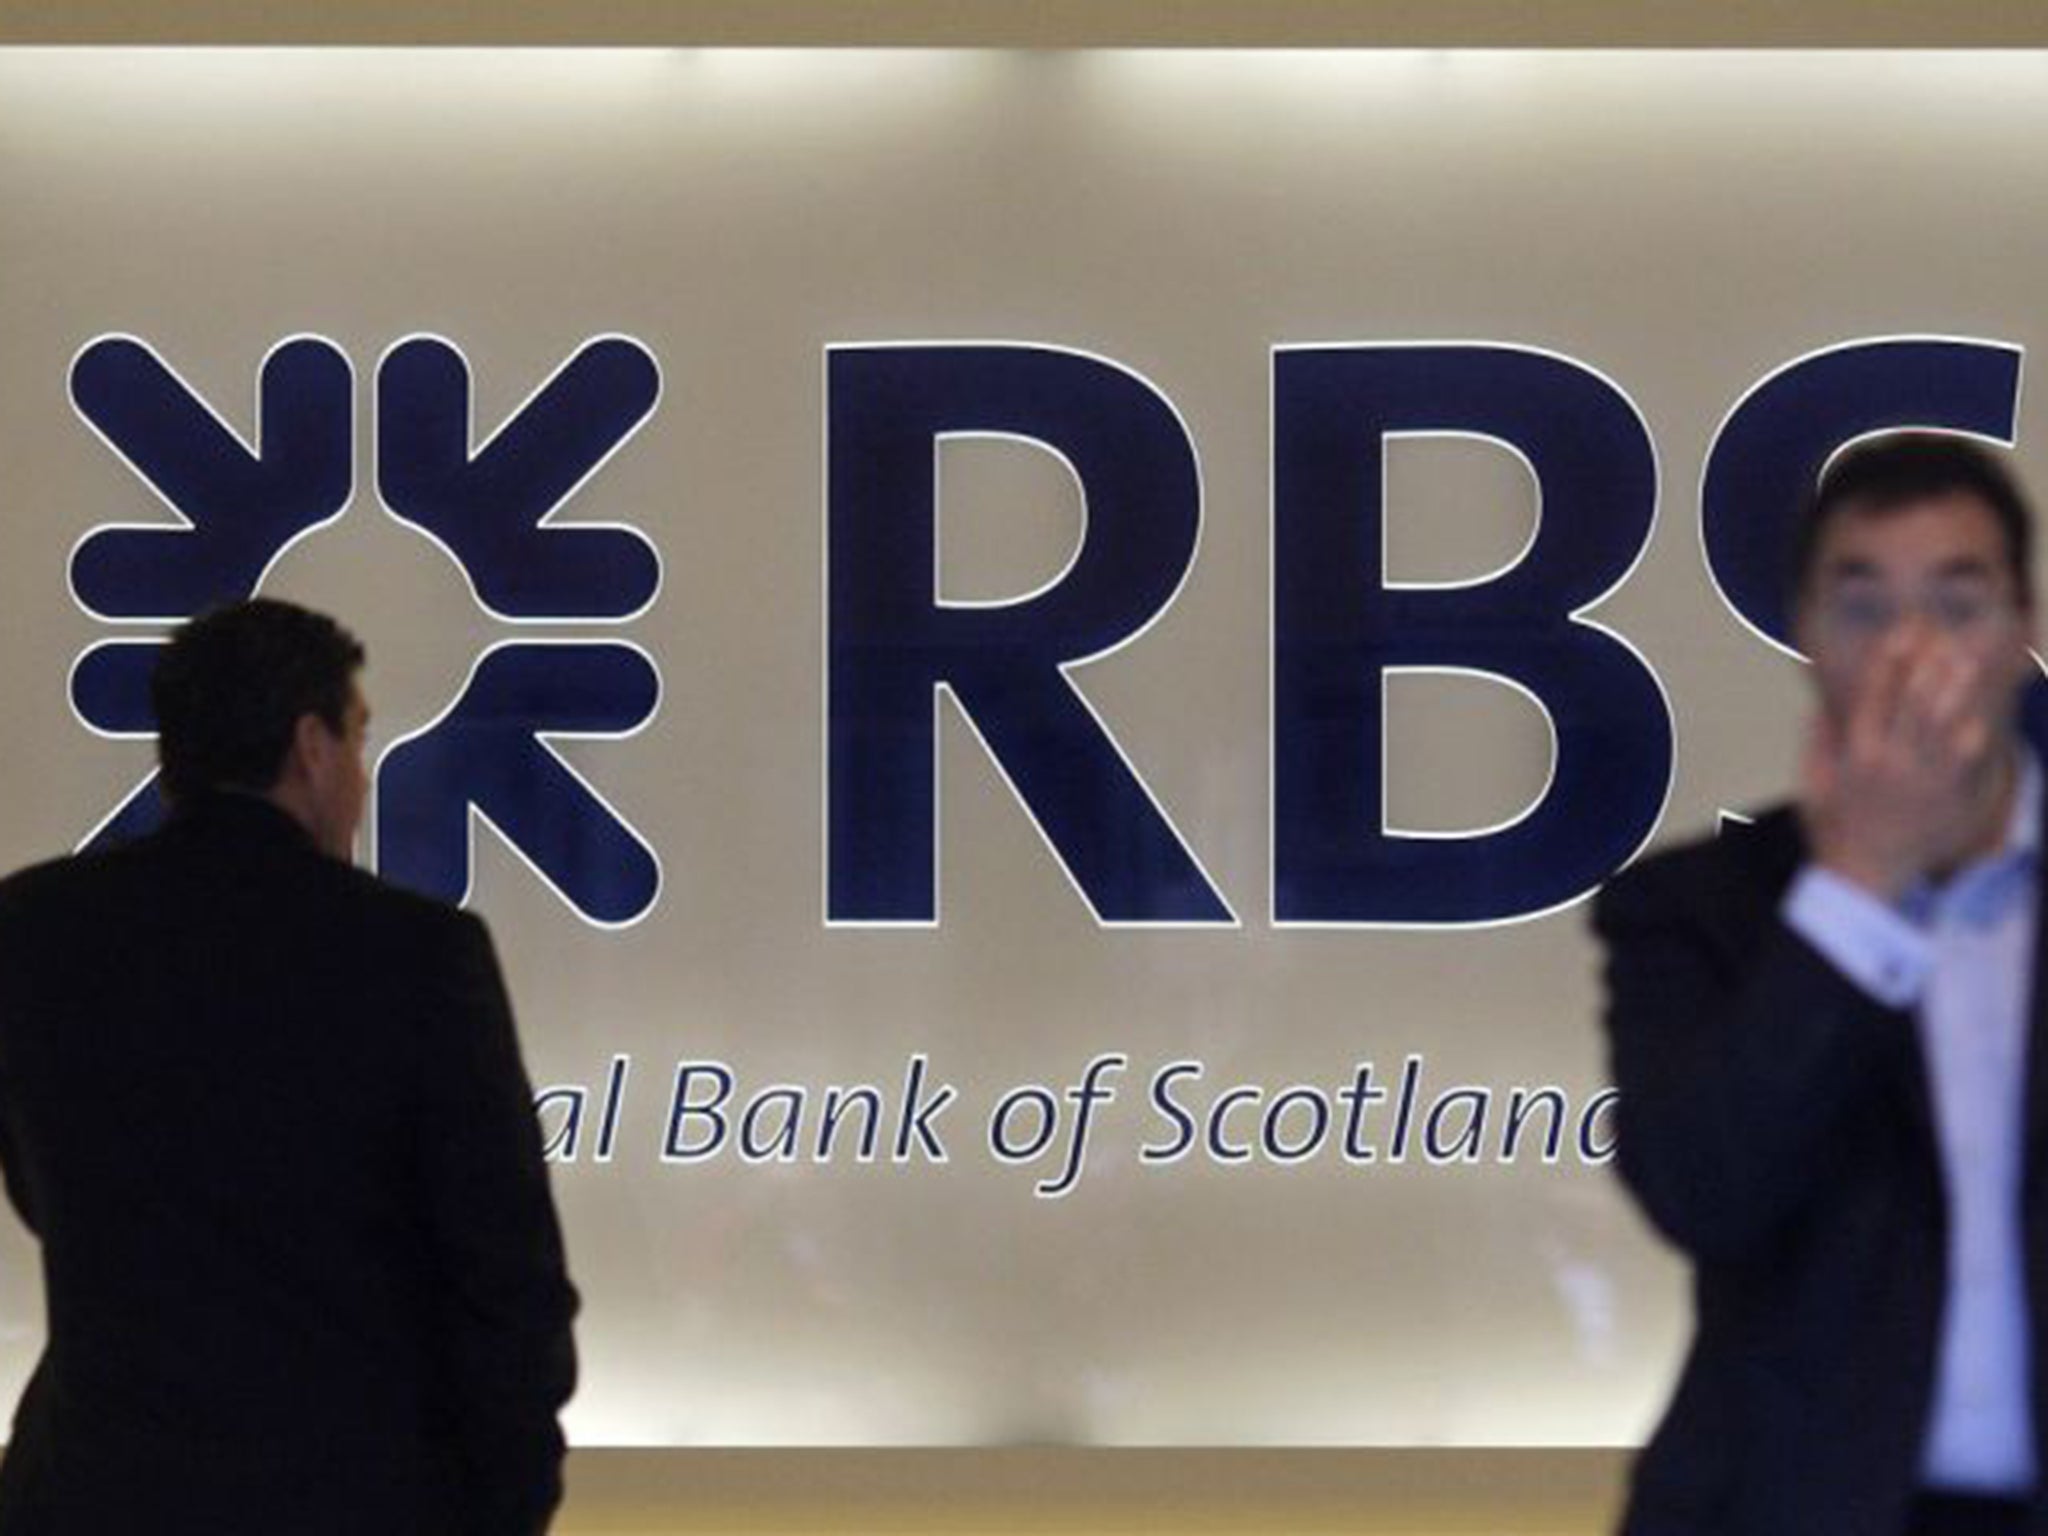 RBS alerted customers on Wednesday that up to 600,000 overnight payments may be 'missing' from bank accounts at NatWest, Coutts and Ulster Bank